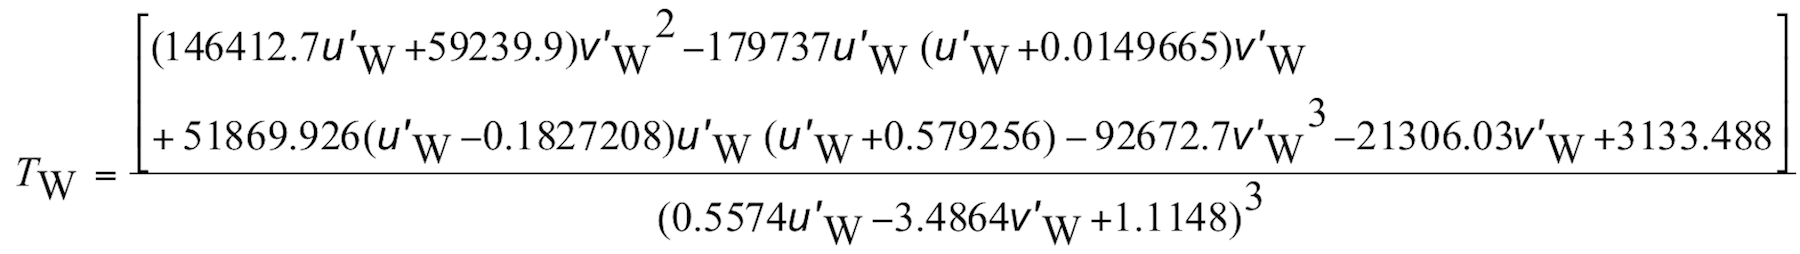 CCT (Tw) Equation 1, enlarged